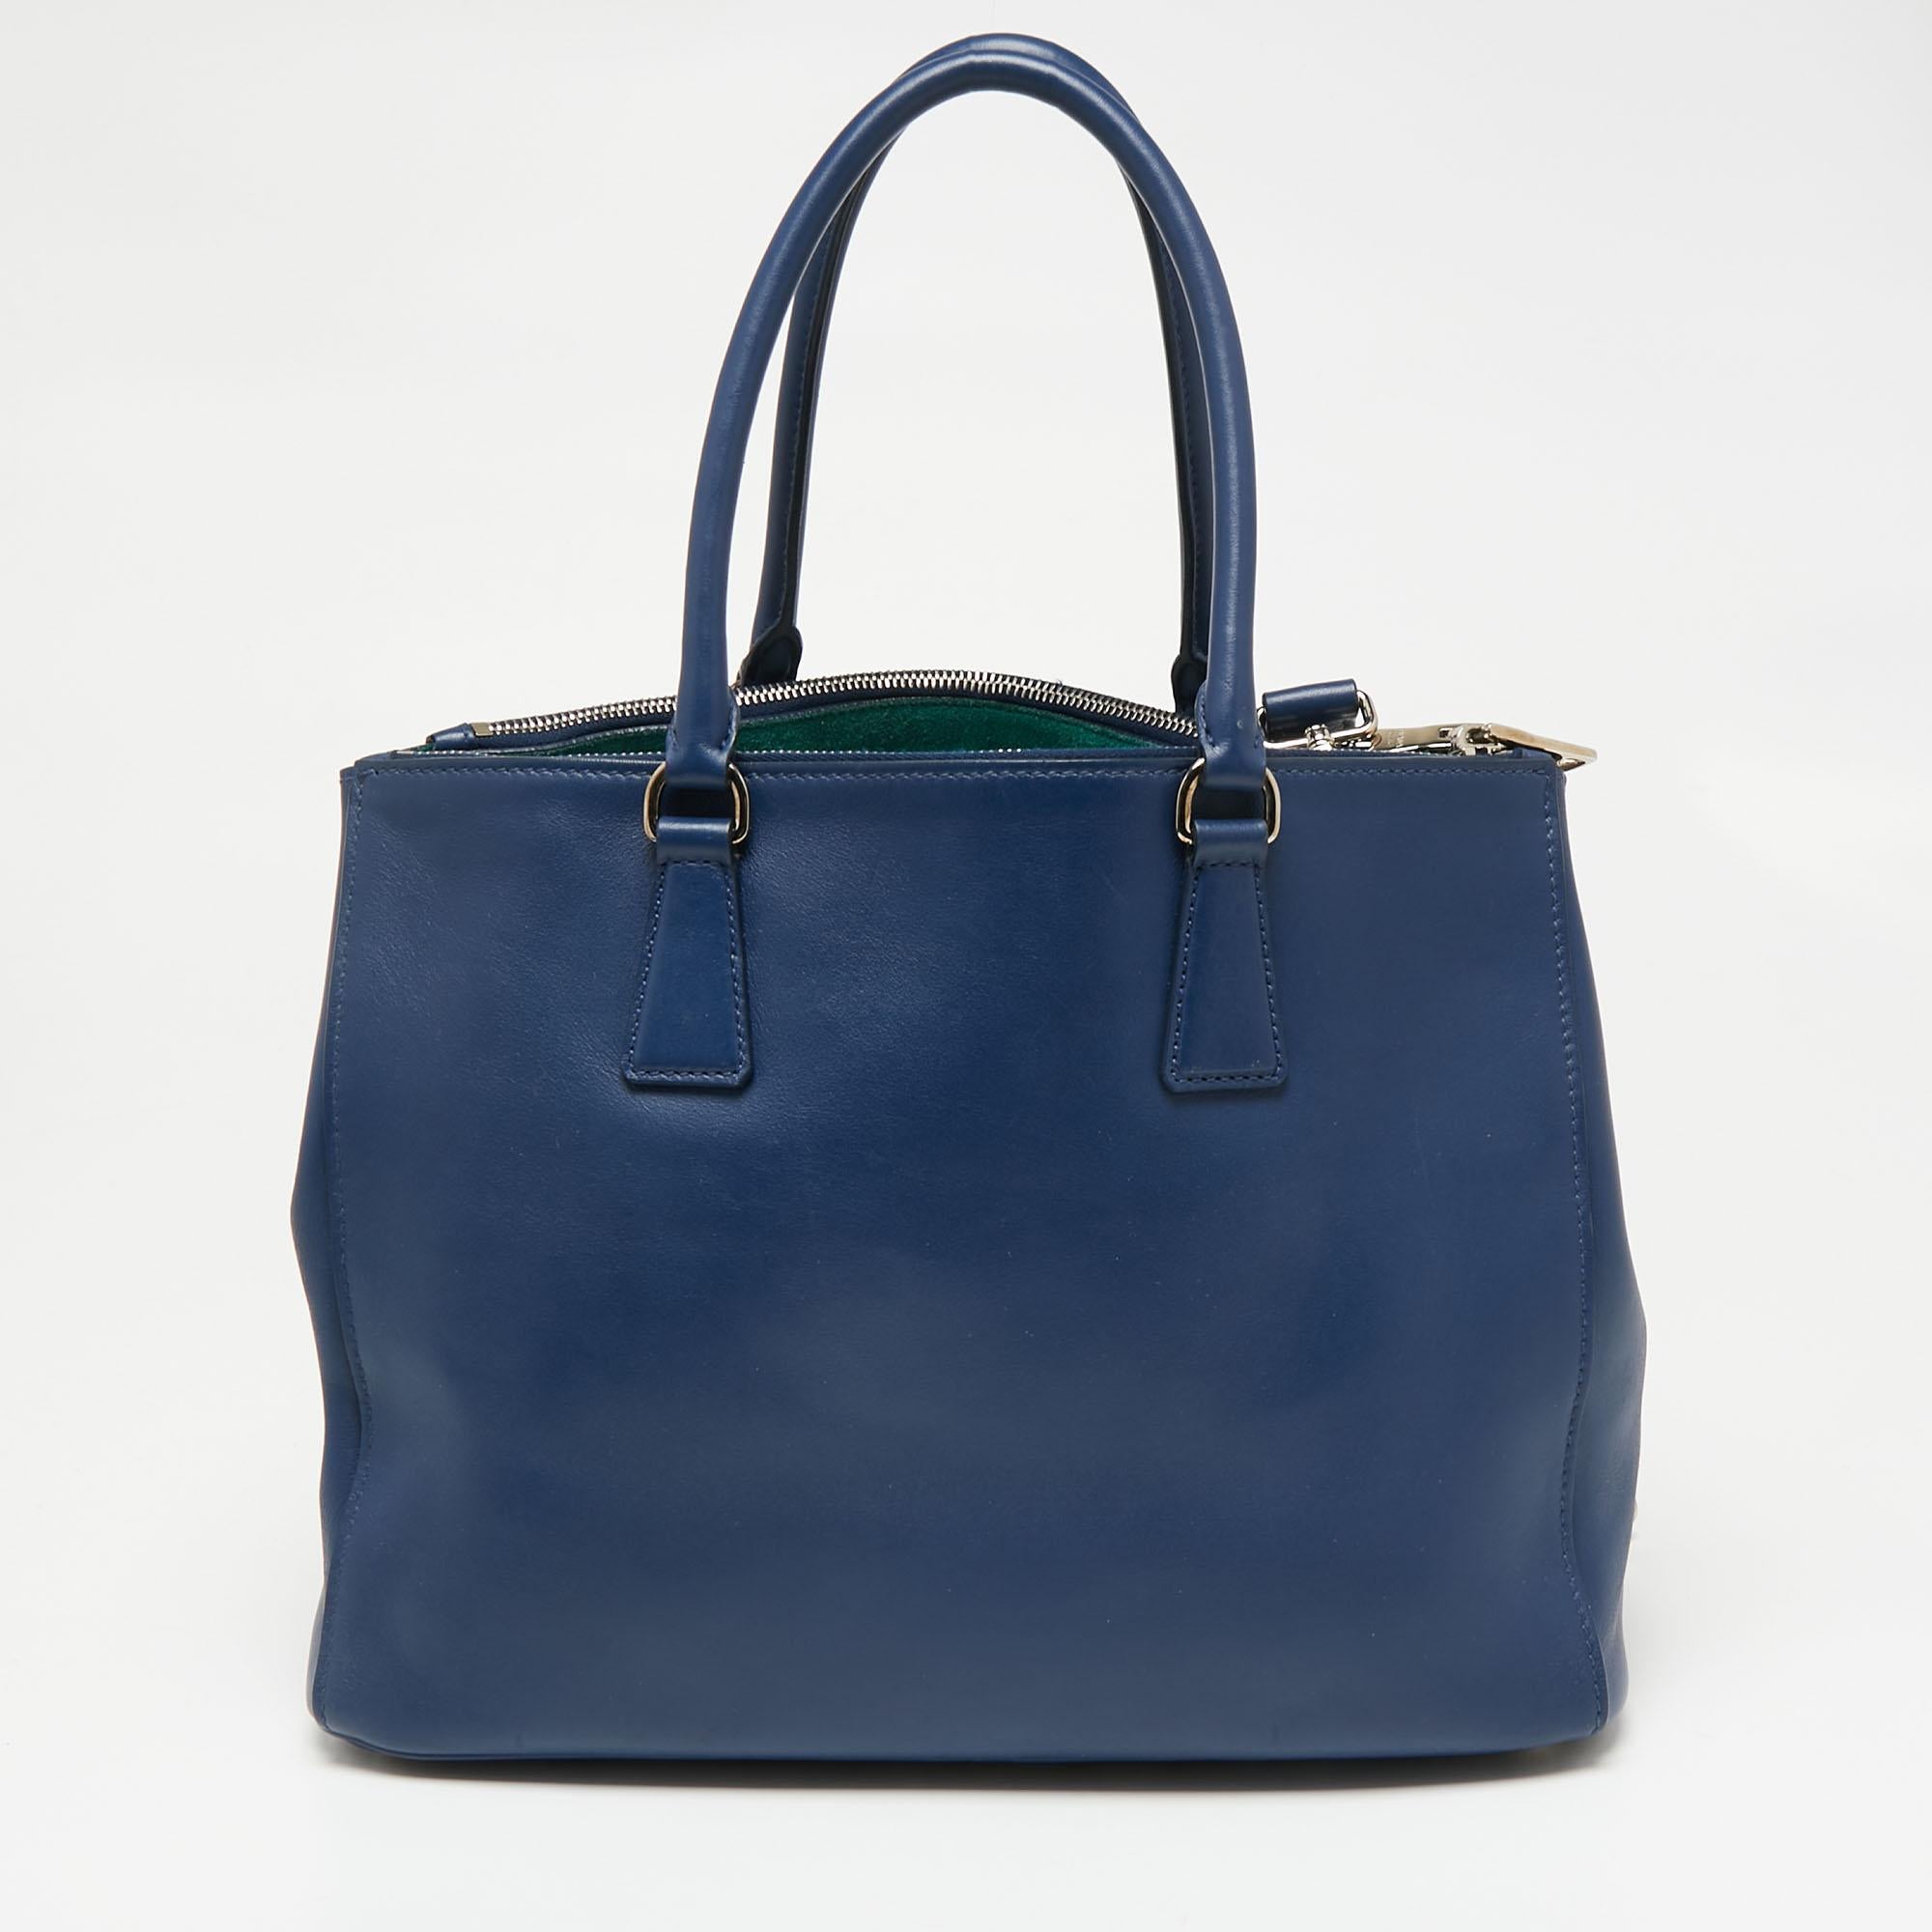 Loved for its classic appeal and functional design, Galleria is one of the most iconic bags from the house of Prada. This beauty in blue is crafted from leather and is equipped with two top handles, the brand logo at the front, and a shoulder strap.